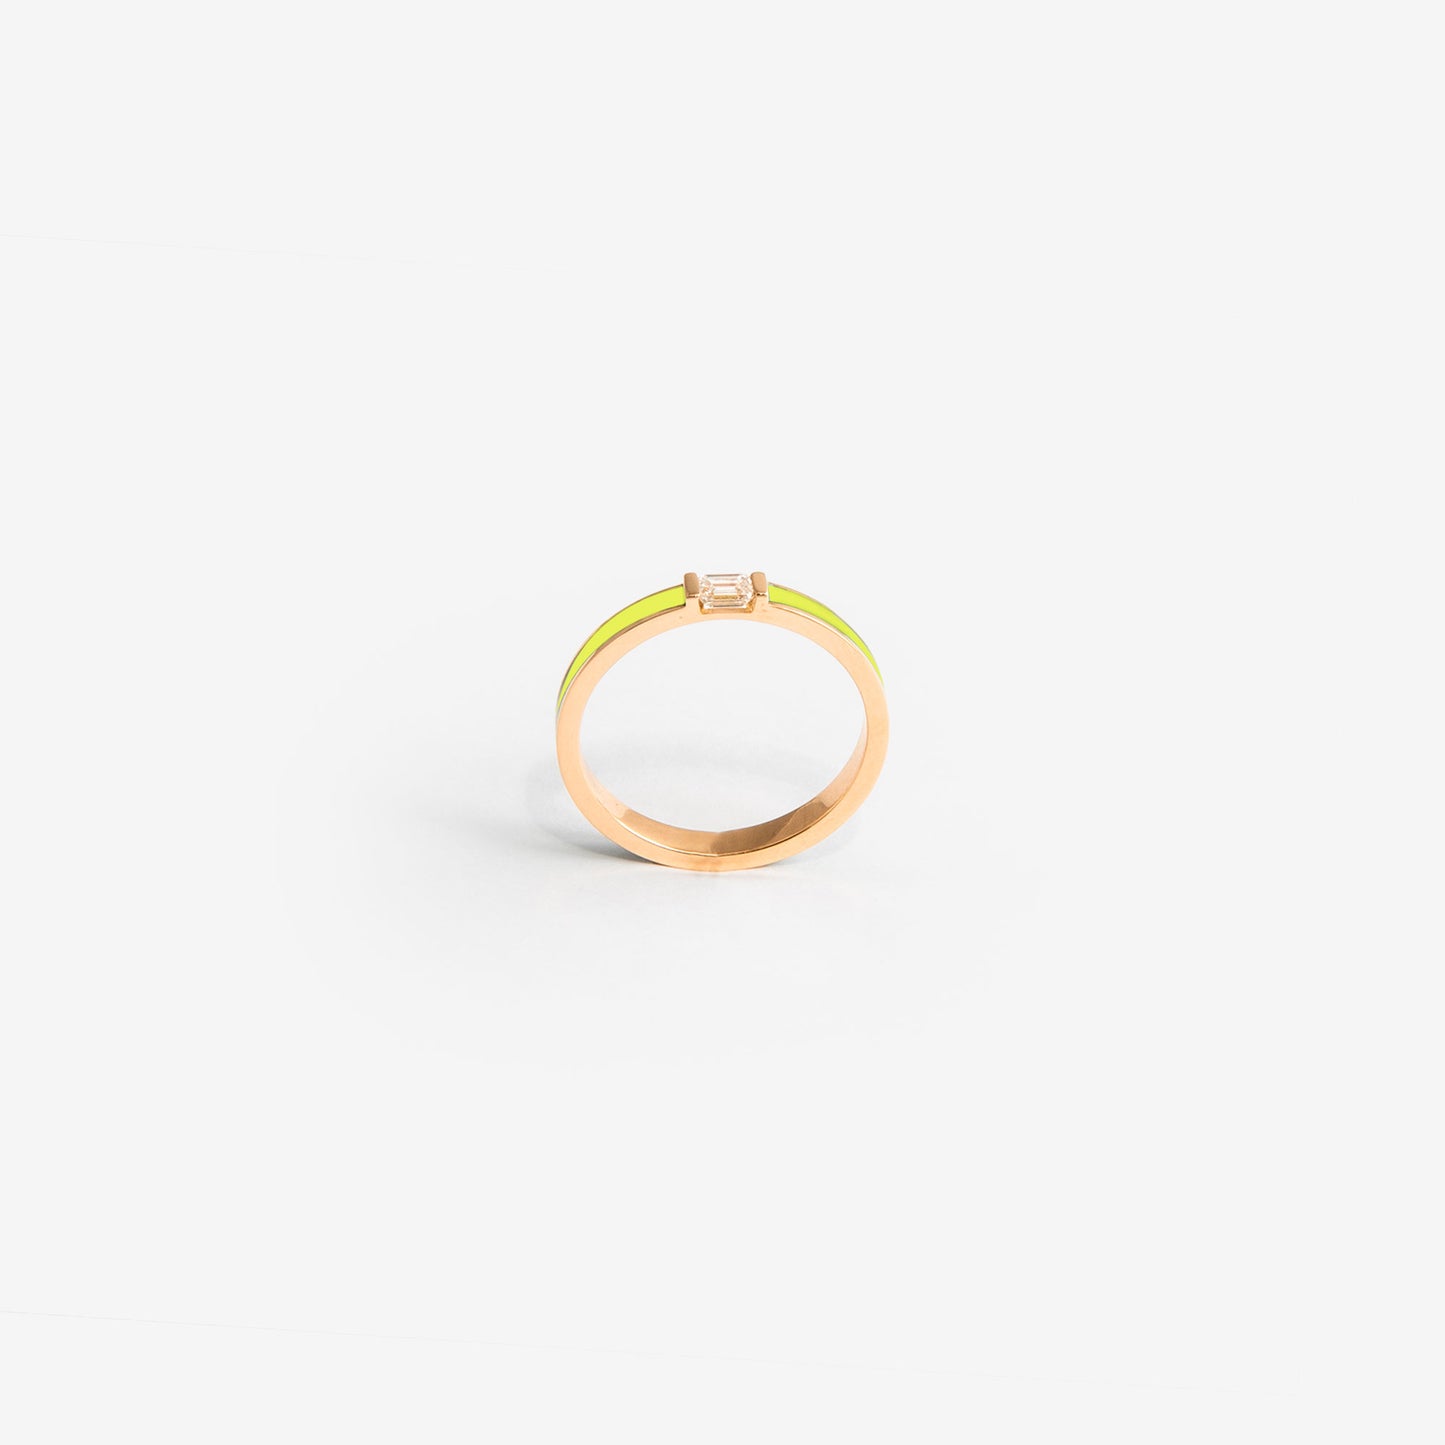 Rose gold band ring lime green enamel and diamond